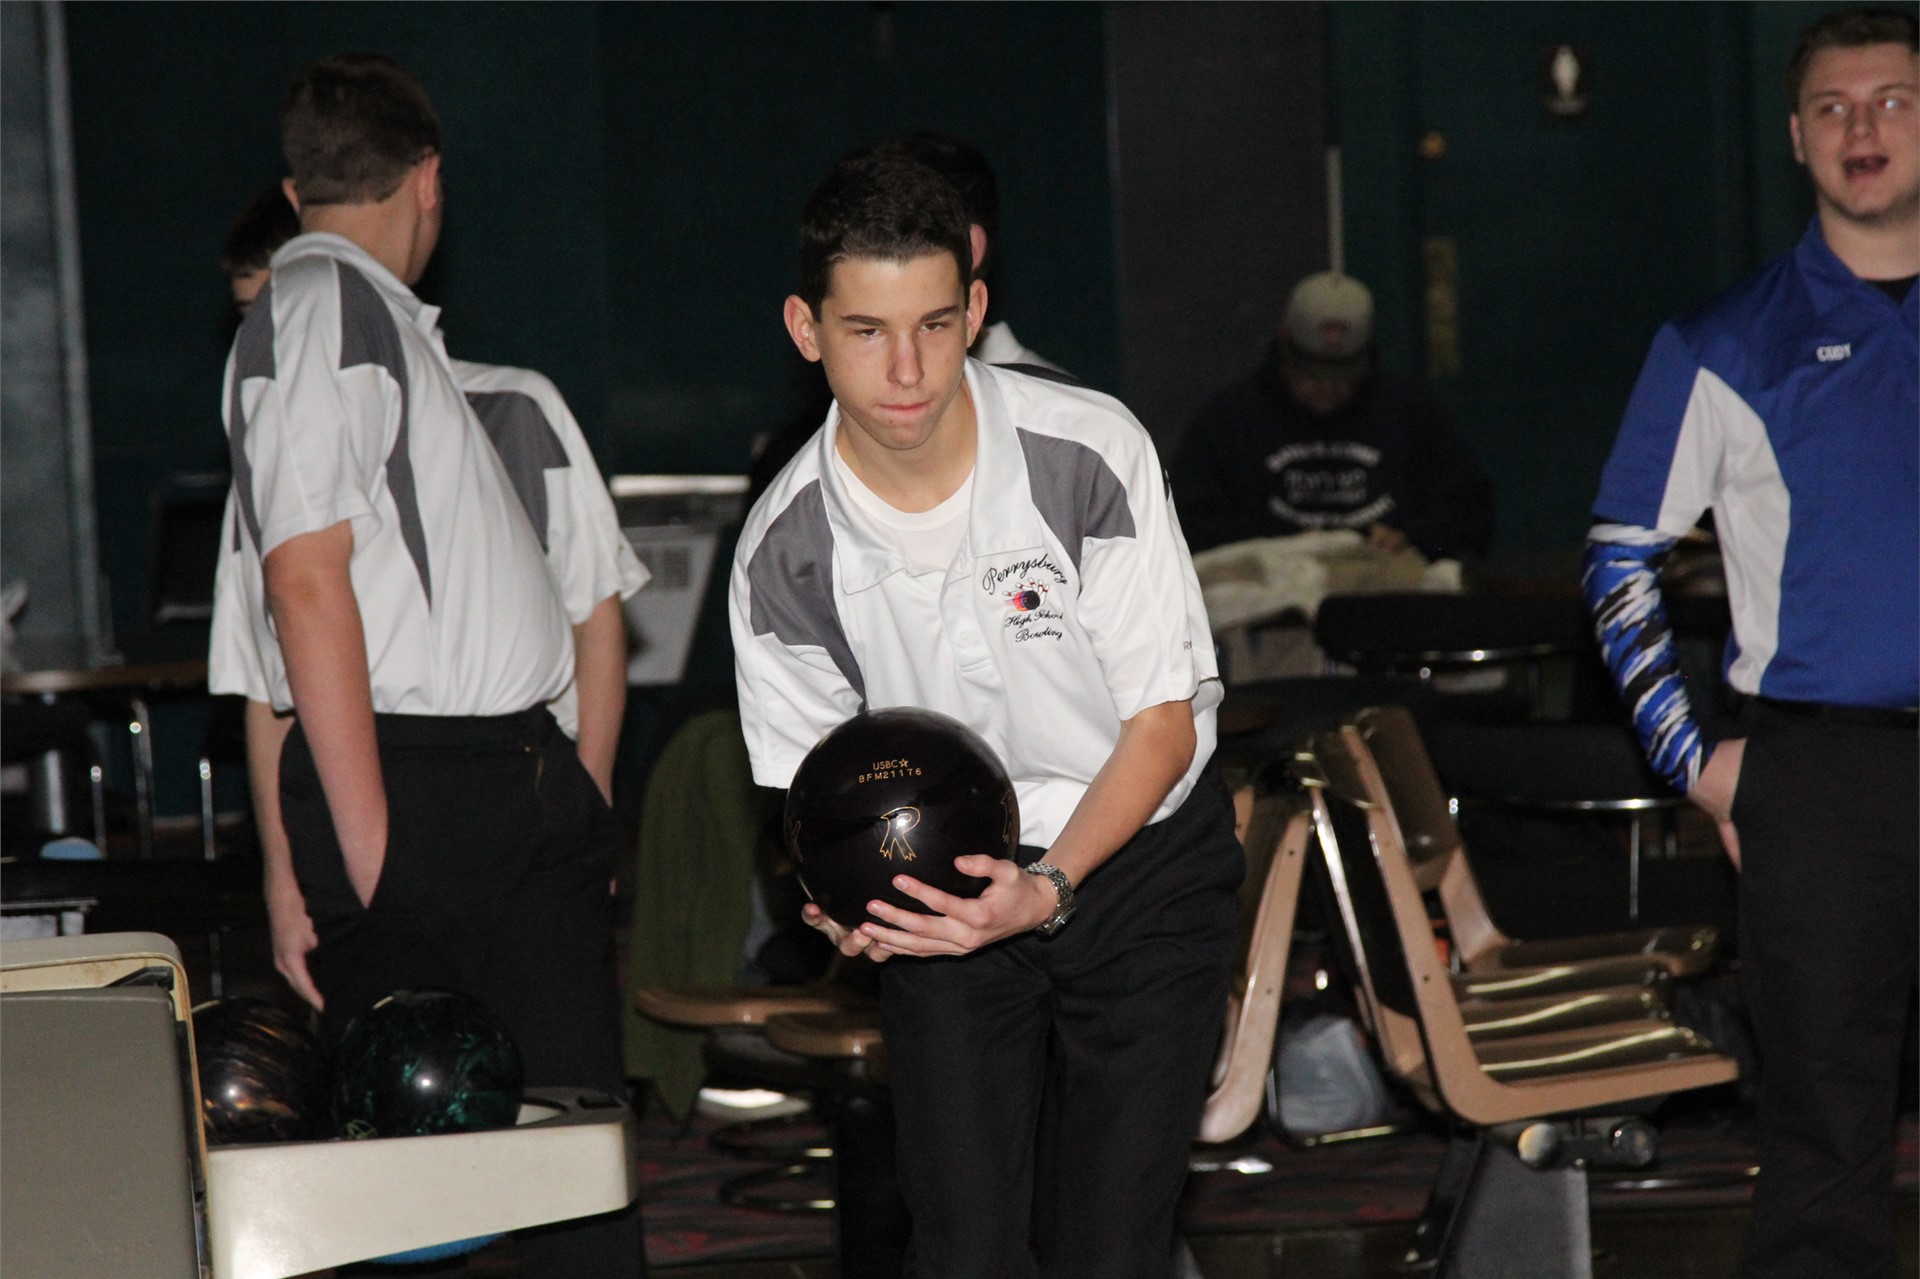 PHS student athlete bowling at a competition